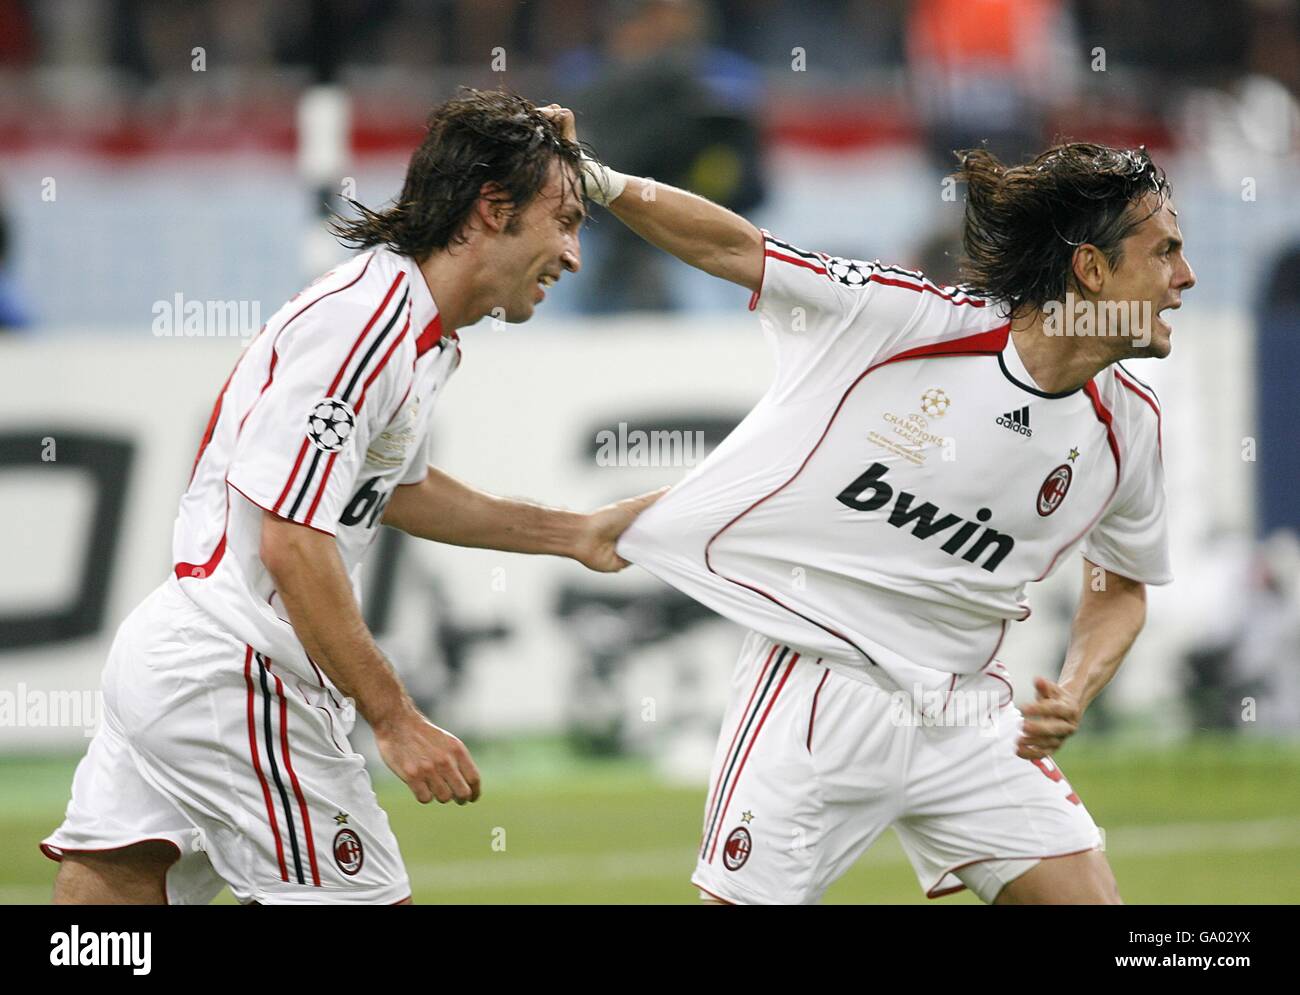 Soccer - UEFA Champions League - Final - AC Milan v Liverpool - Olympic Stadium. AC Milan's Filippo Inzaghi (r) celebrates with his team mate Andrea Pirlo after scoring the first goal Stock Photo